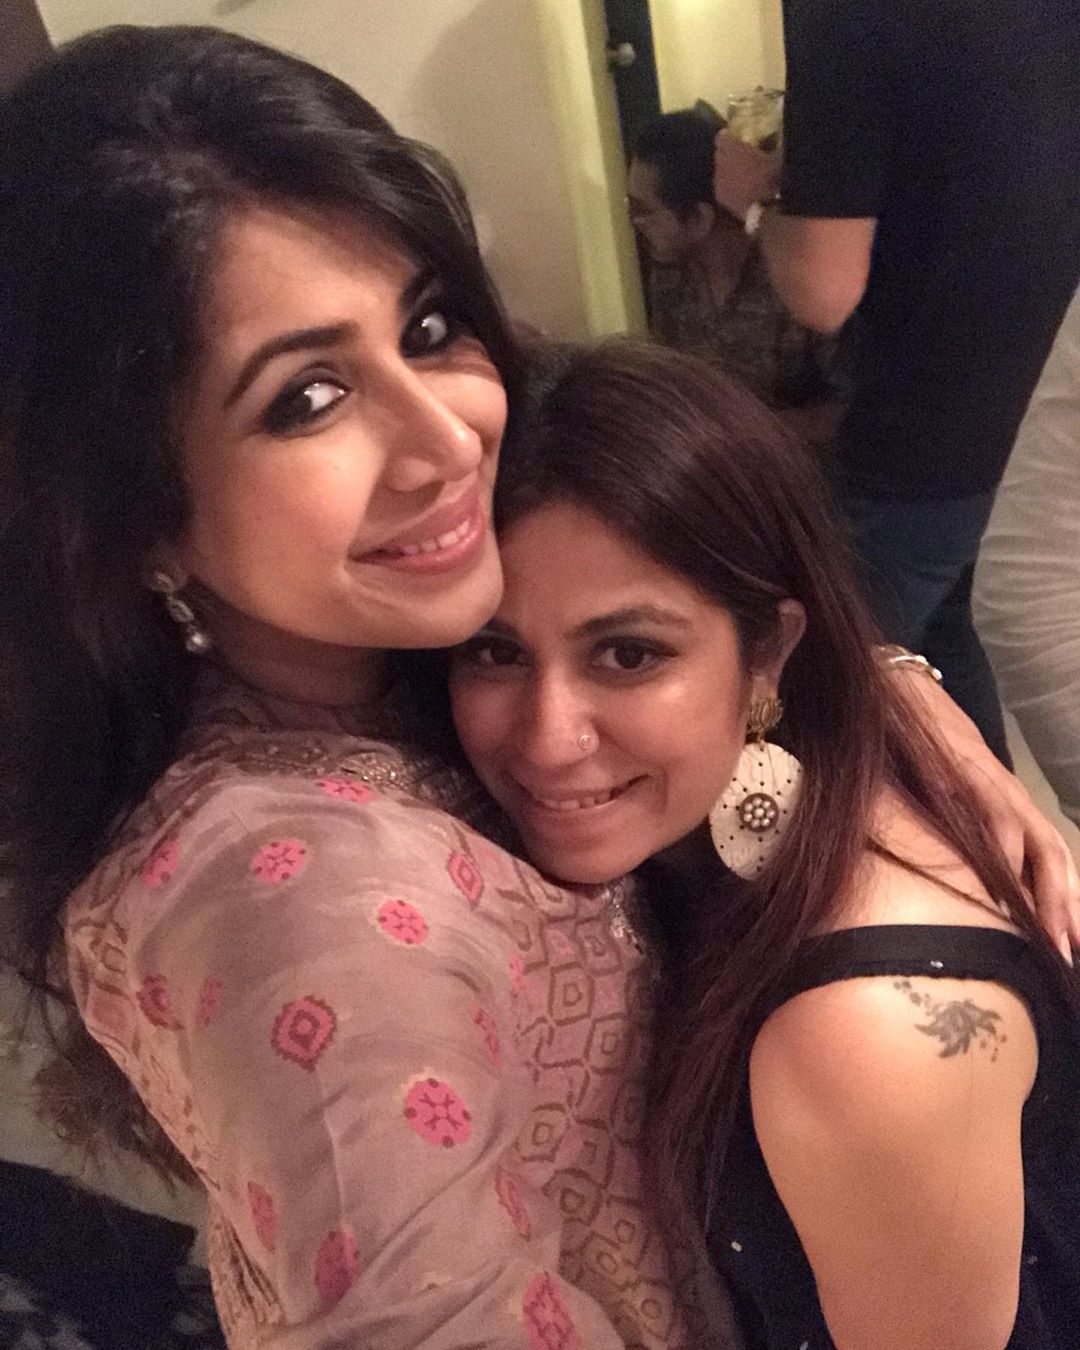 Yeh Hai Mohabbatein' Fame Karan Patel's Wife Ankita Bhargava Spotted Hiding Her Baby Bump In Diwali 2019 Party Pics! Fans Ask 